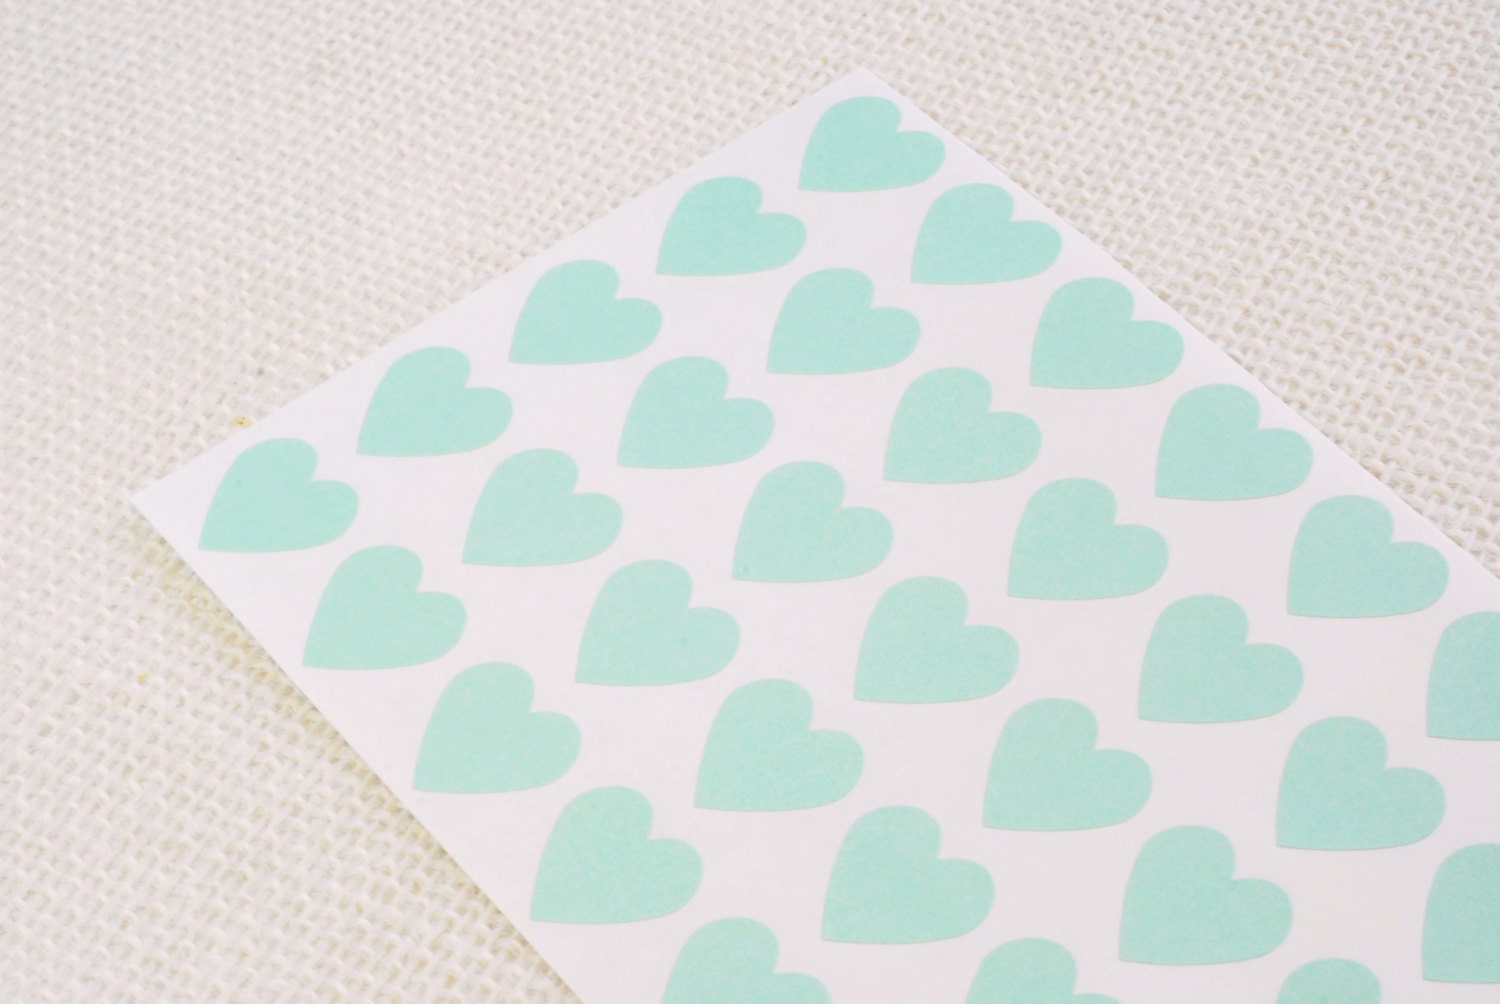 Mint Green Heart Stickers 3/4" - Free Shipping / Pack of 82 / Envelope Seals / Wedding Seals / Wedding Invitation Seals / Heart Labels